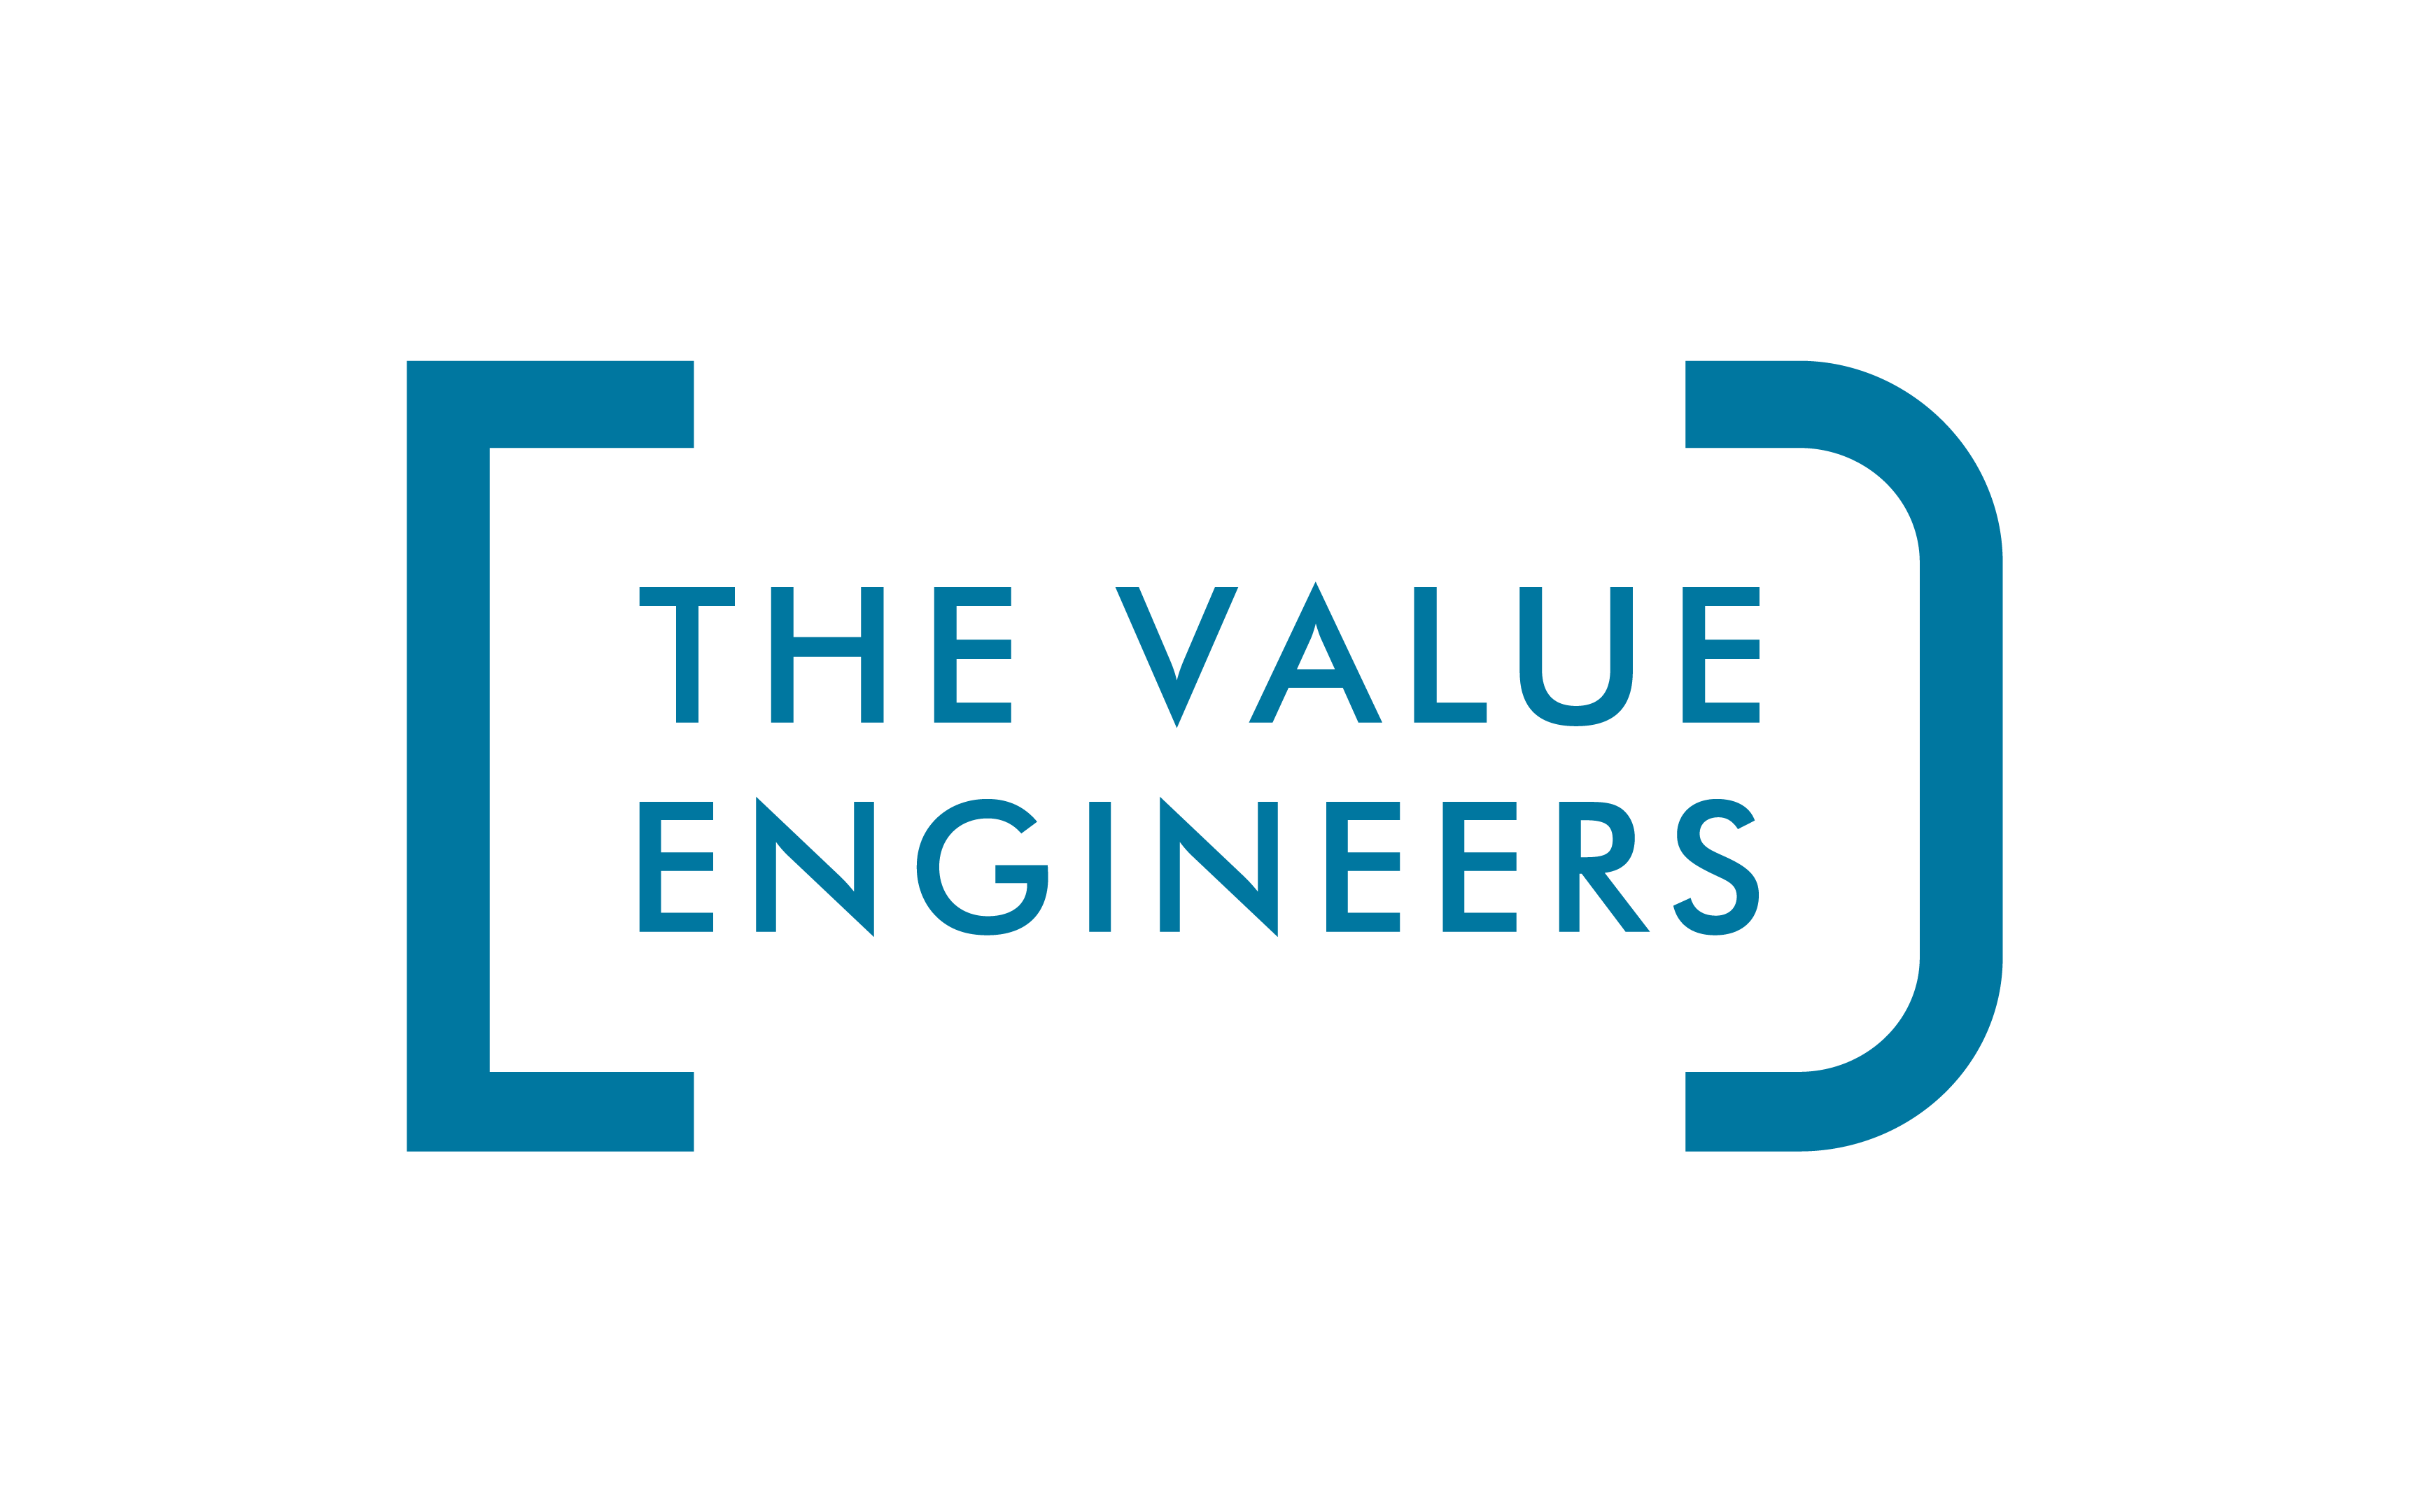 The Value Engineers